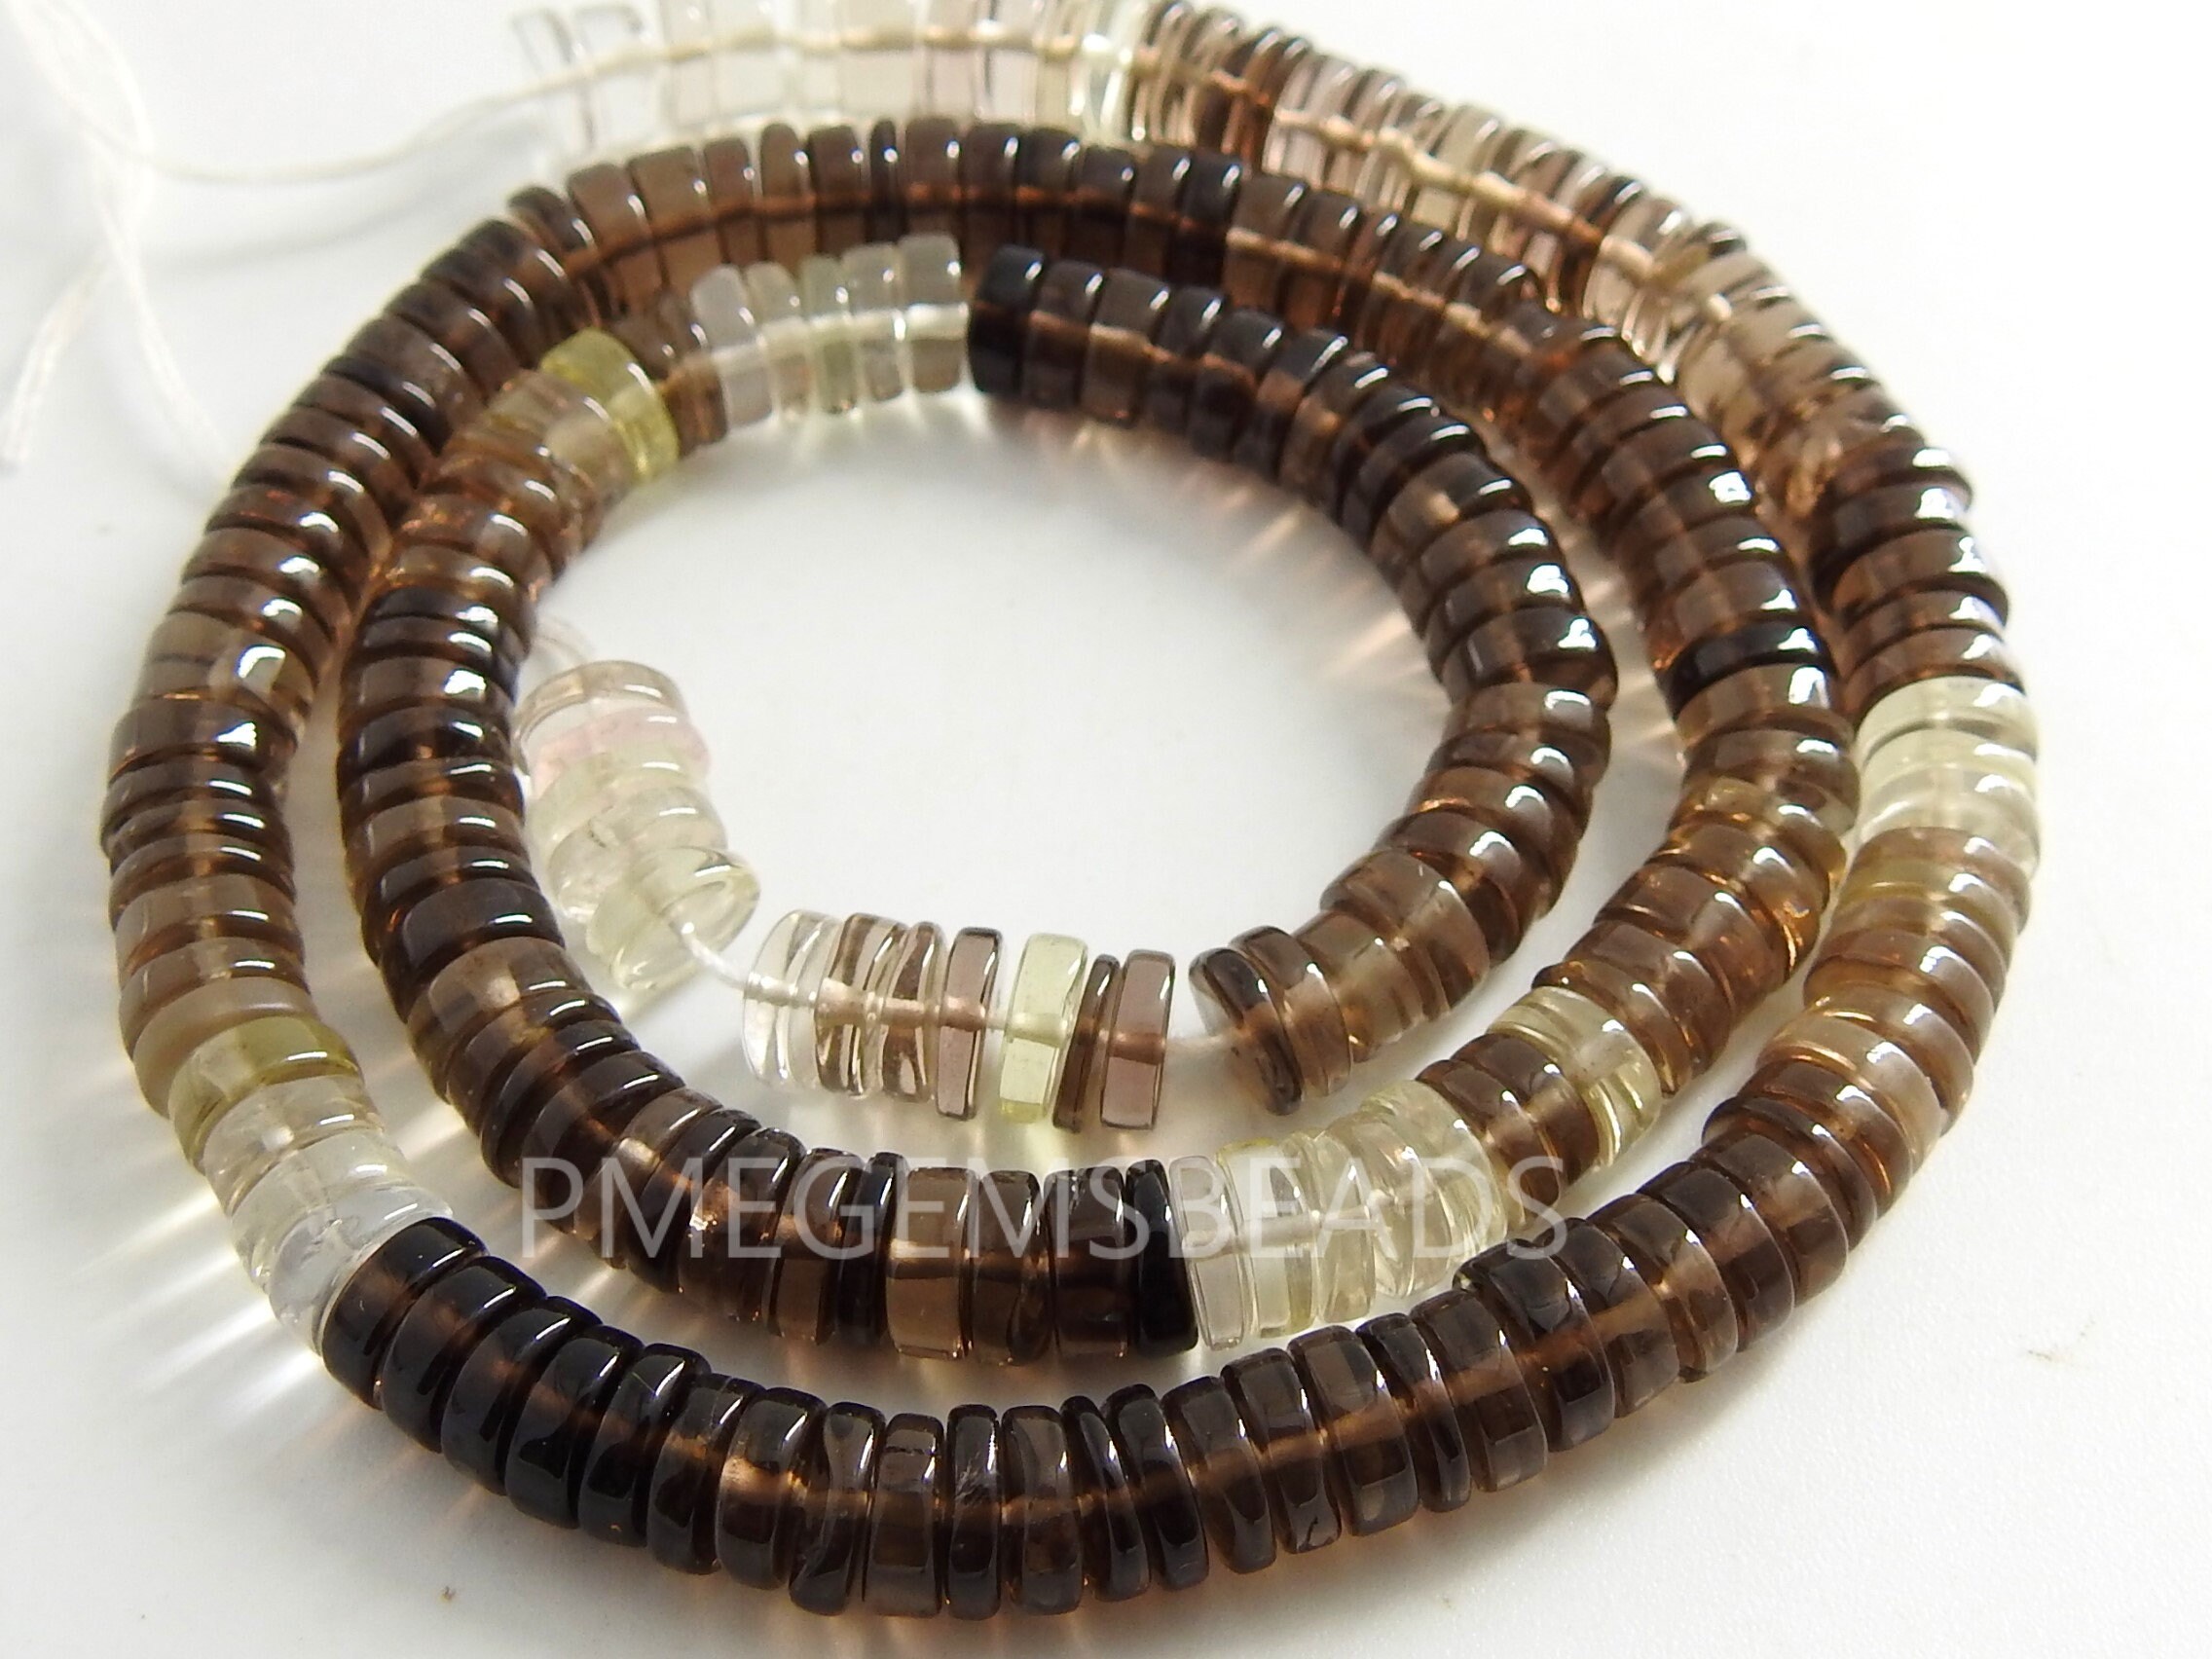 Smoky Quartz Smooth Tyres,Coin,Button Shape Bead,Multi Shaded,Loose Stone,Handmade,For Jewelry Makers 16Inch Strand 100%Natural (Pme)T2 | Save 33% - Rajasthan Living 16